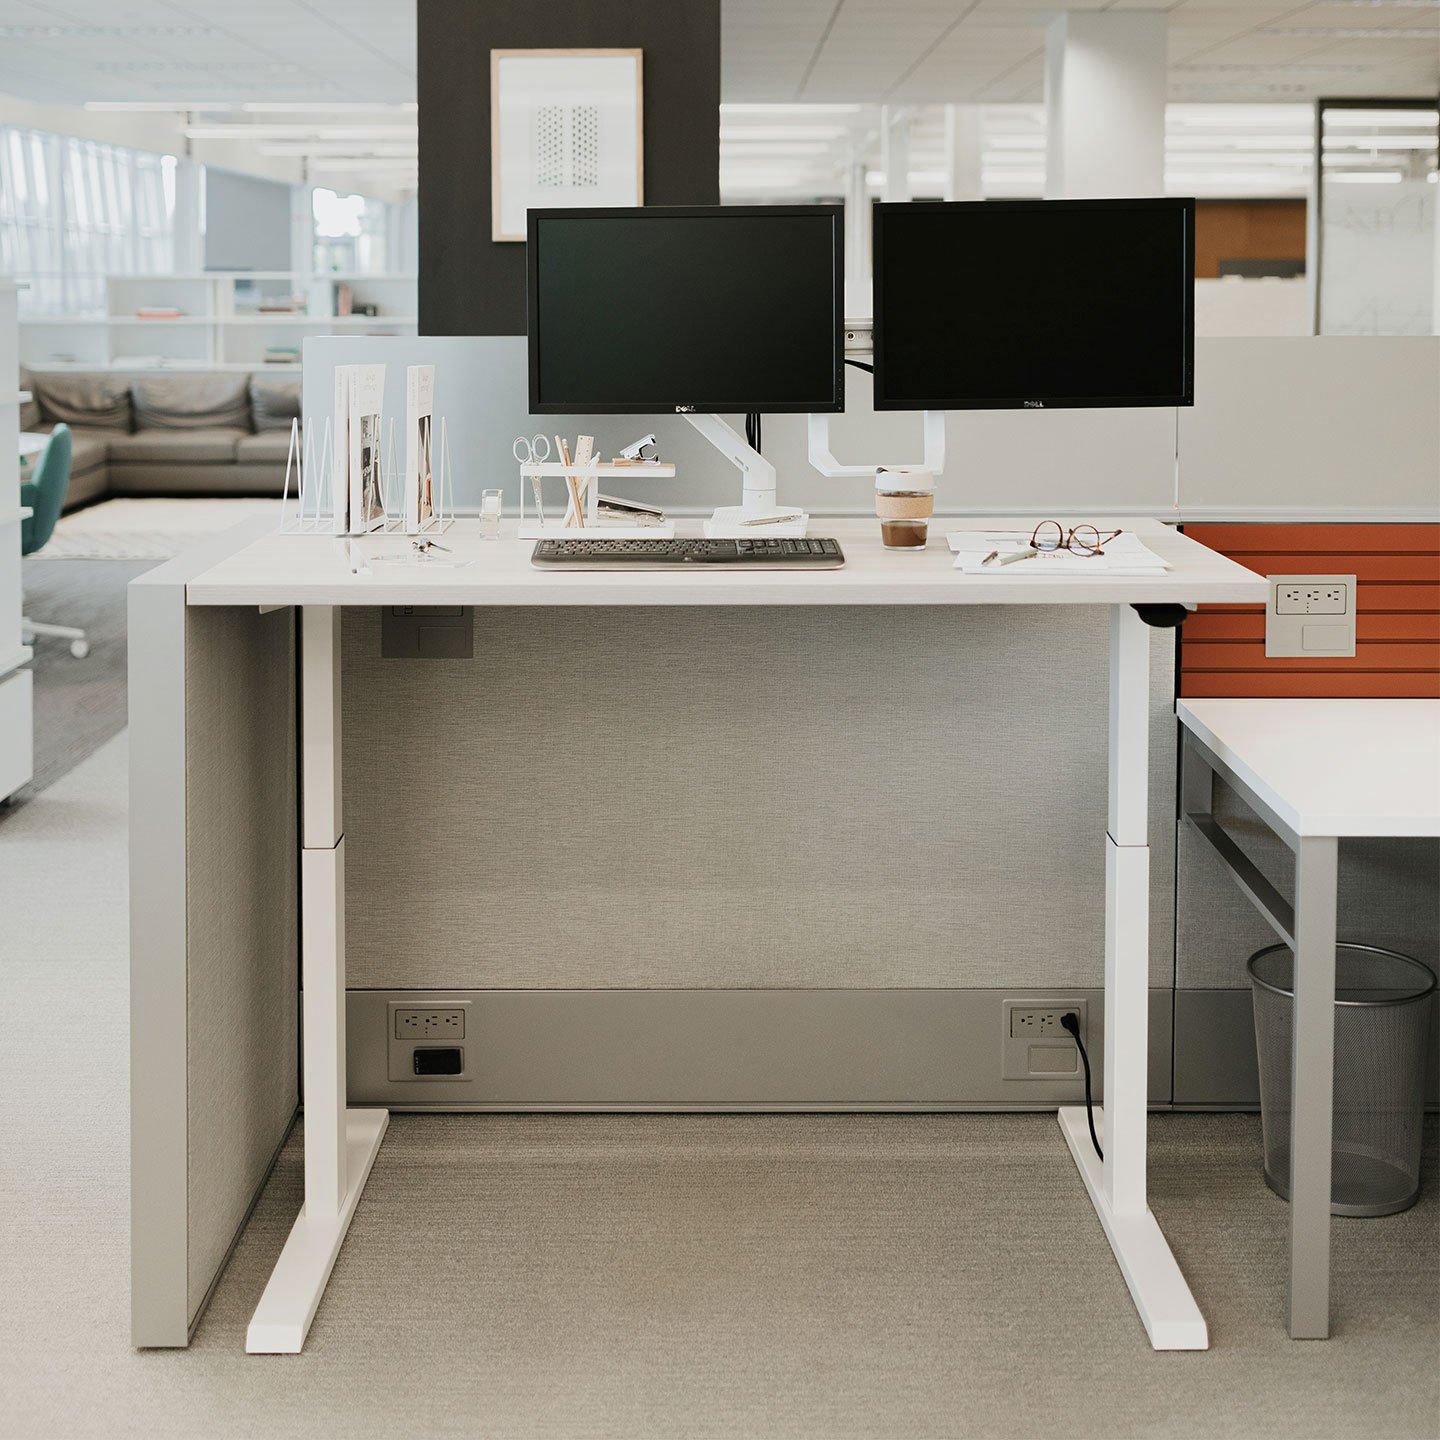 Haworth Upside Height Adjustable Table being used as a desk in an office